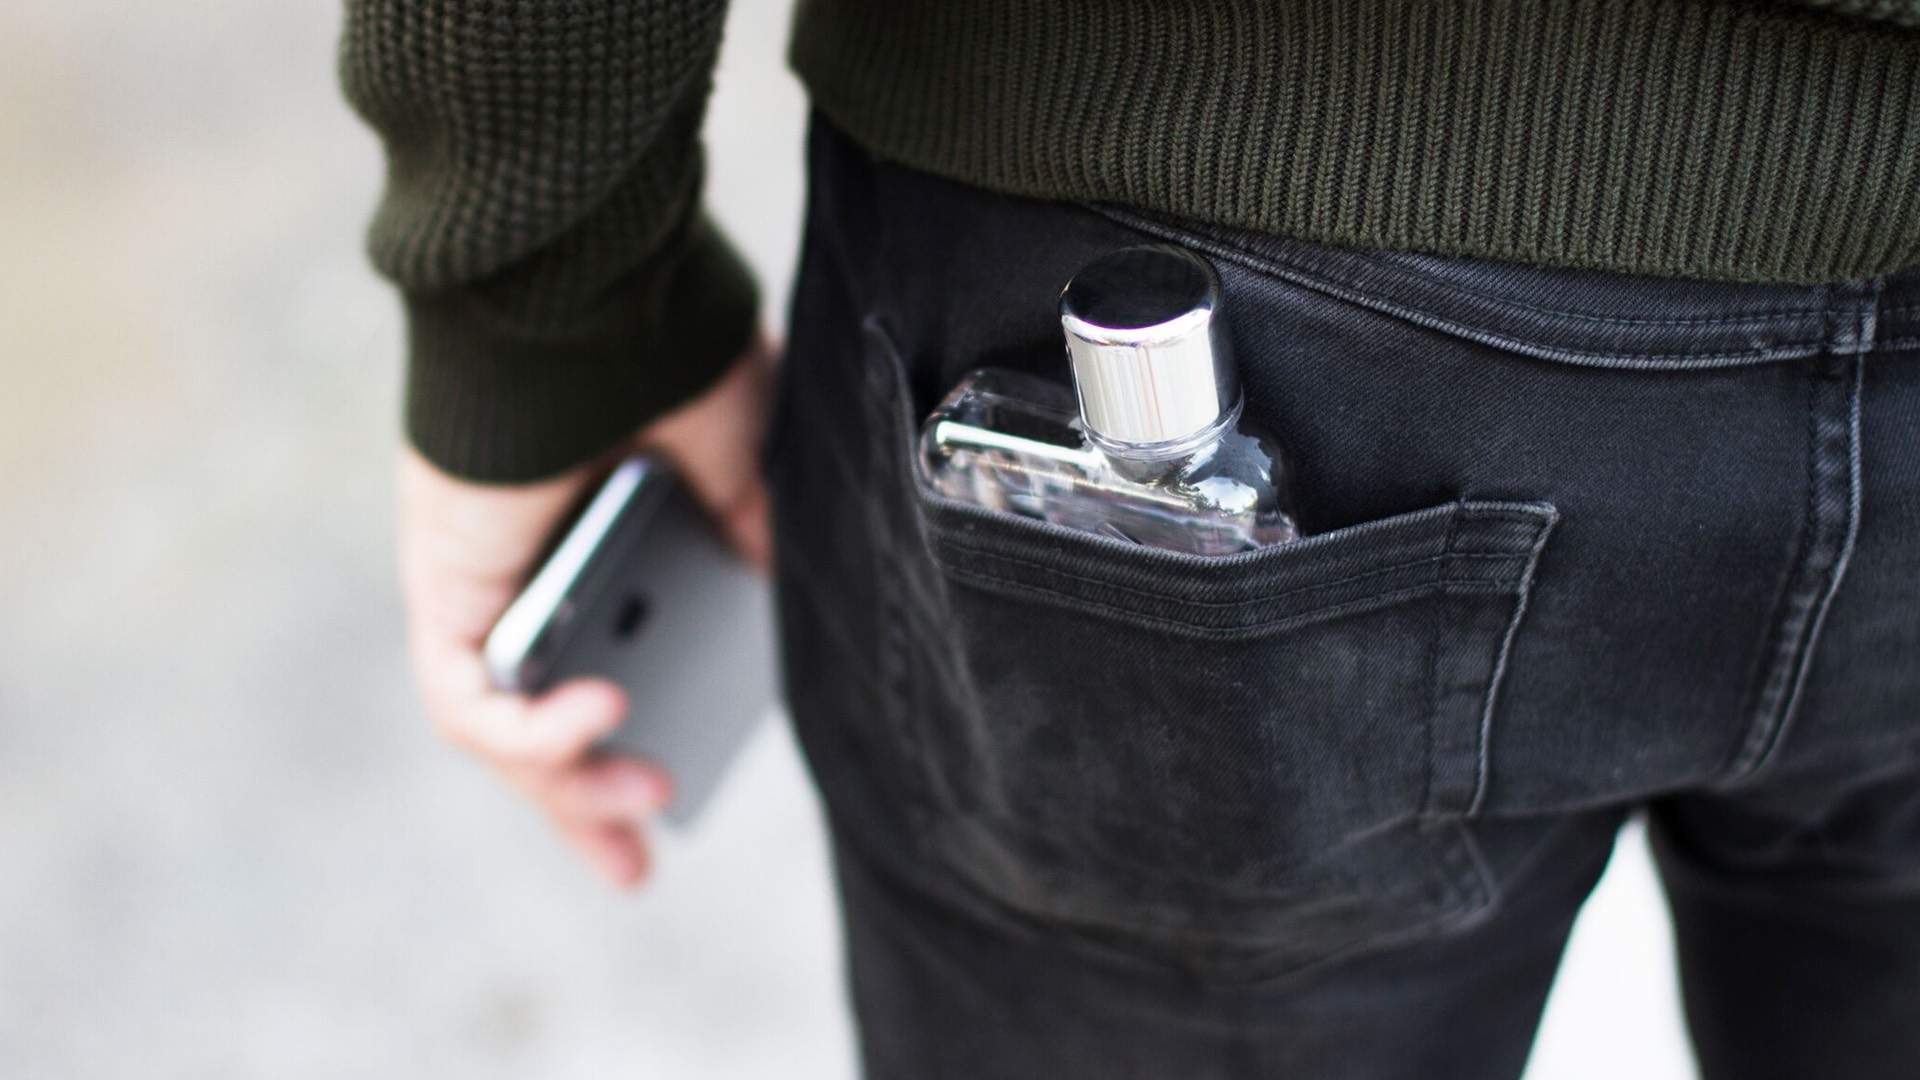 This New Range of Designer Water Bottles Are Flat Enough to Fit in Your Pocket